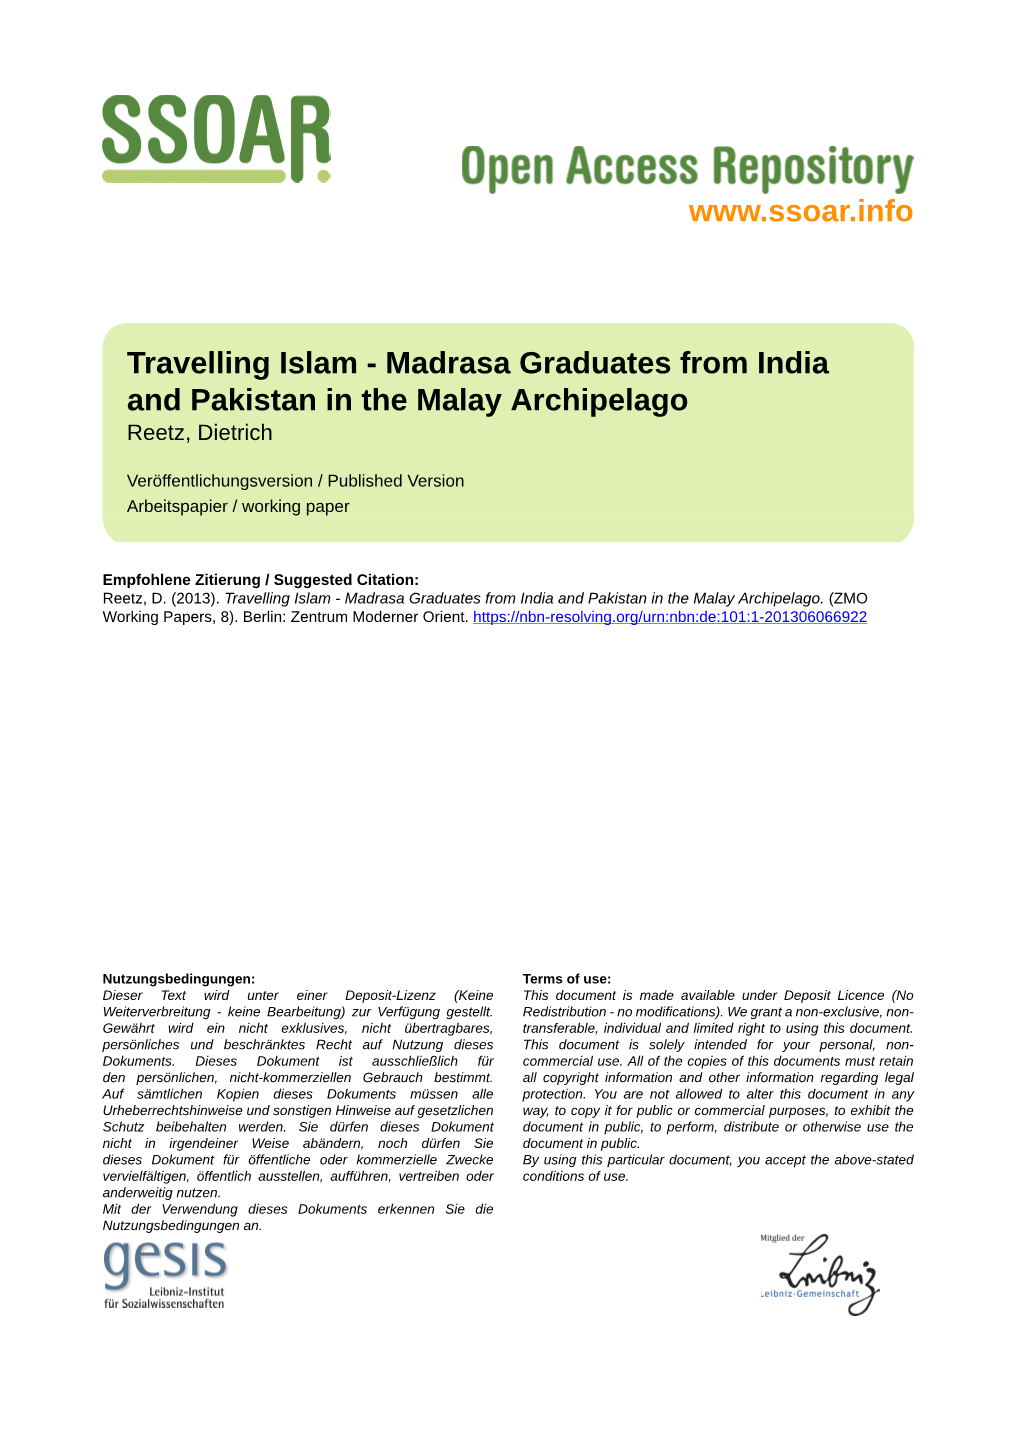 Travelling Islam - Madrasa Graduates from India and Pakistan in the Malay Archipelago Reetz, Dietrich